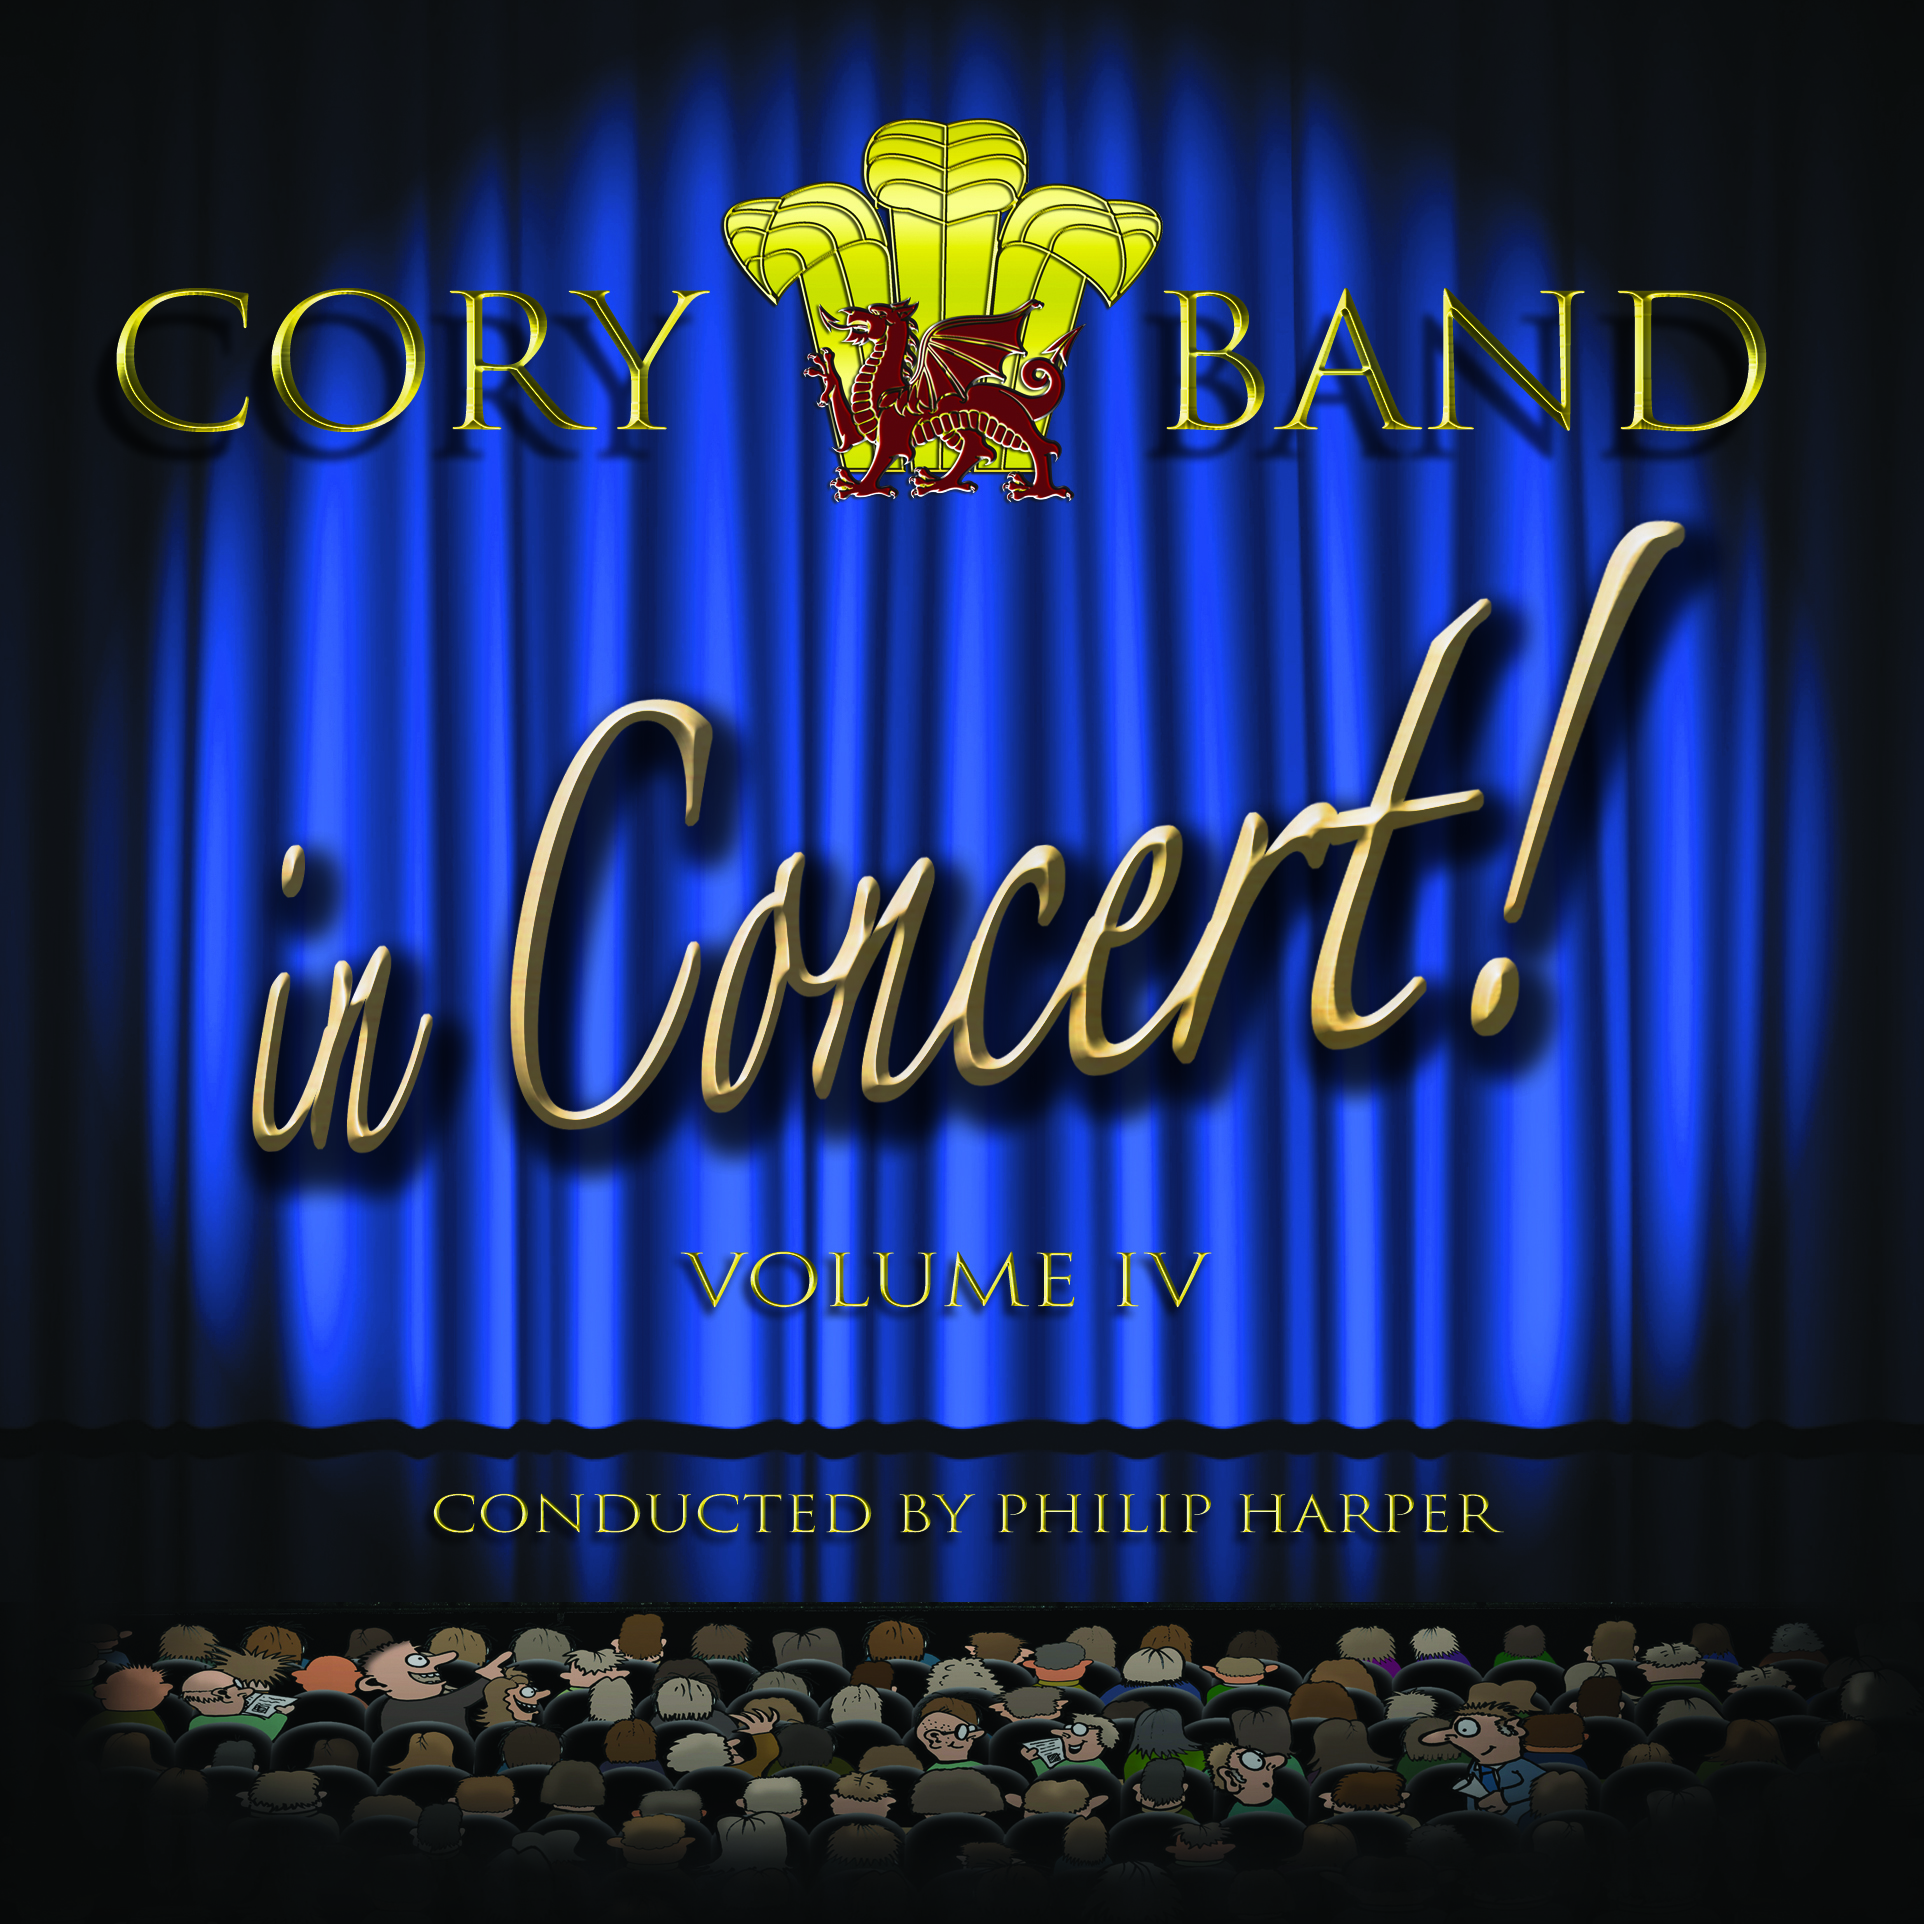 Cory in Concert Vol. IV - Download